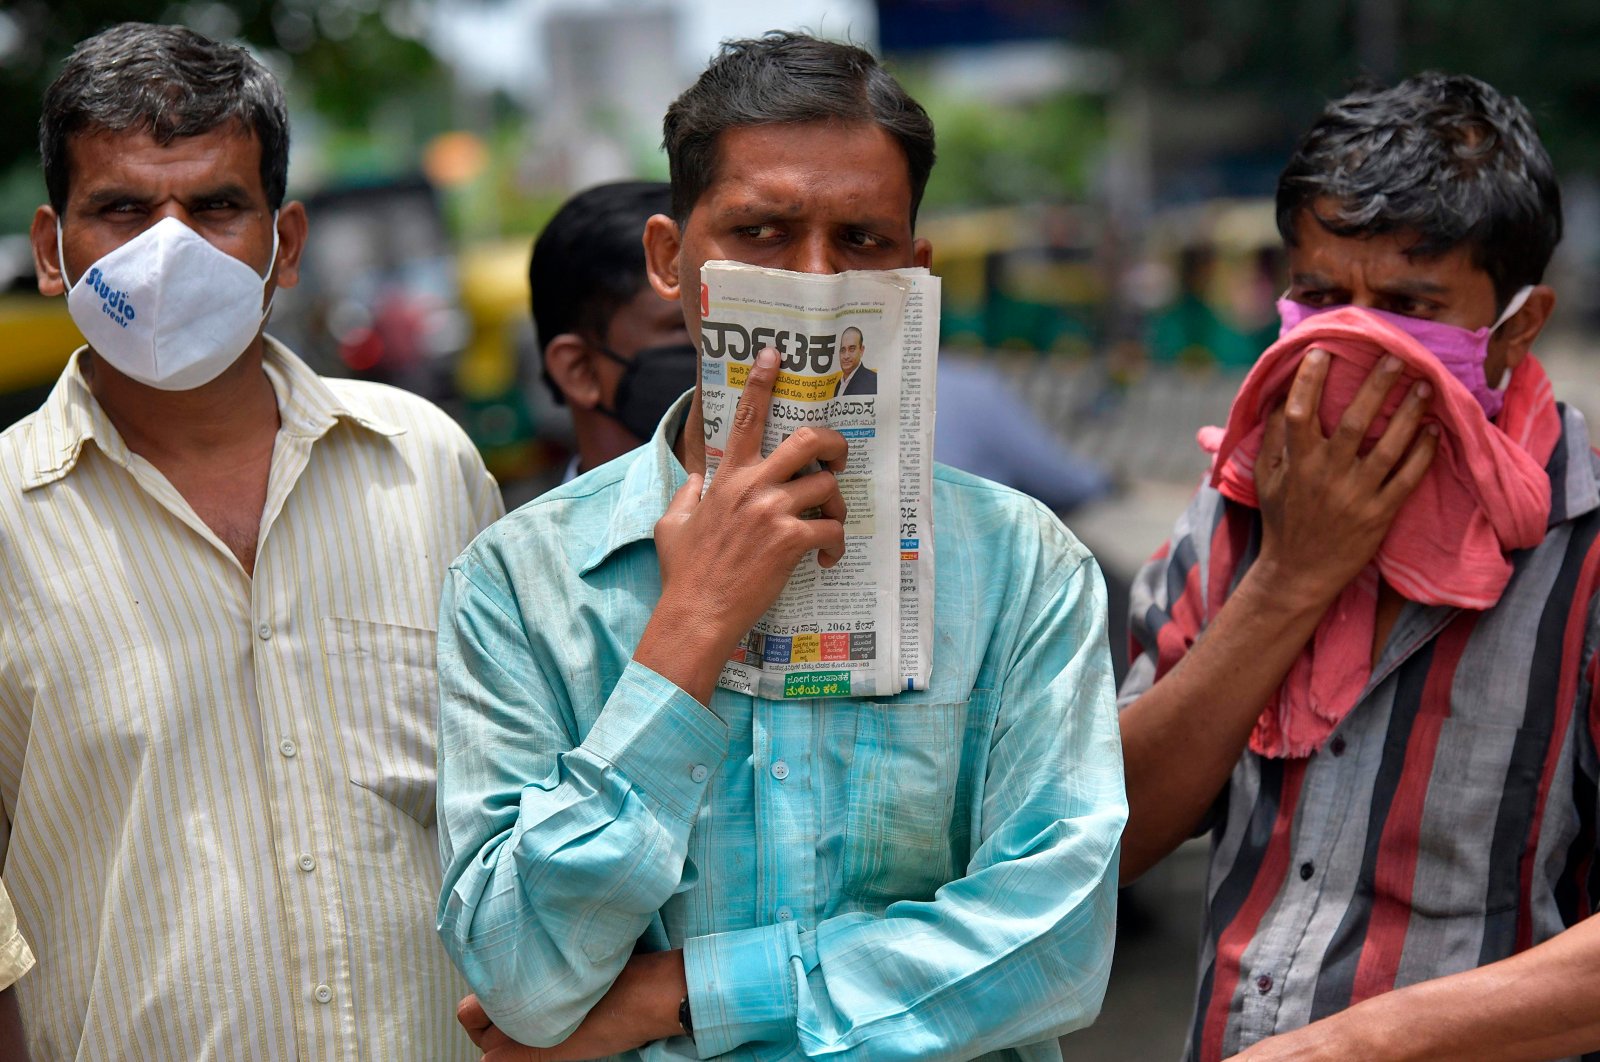 A man holds a newspaper to cover his face in the absence of his face mask during the coronavirus pandemic, in Bangalore, India, July 9, 2020. (AFP Photo)